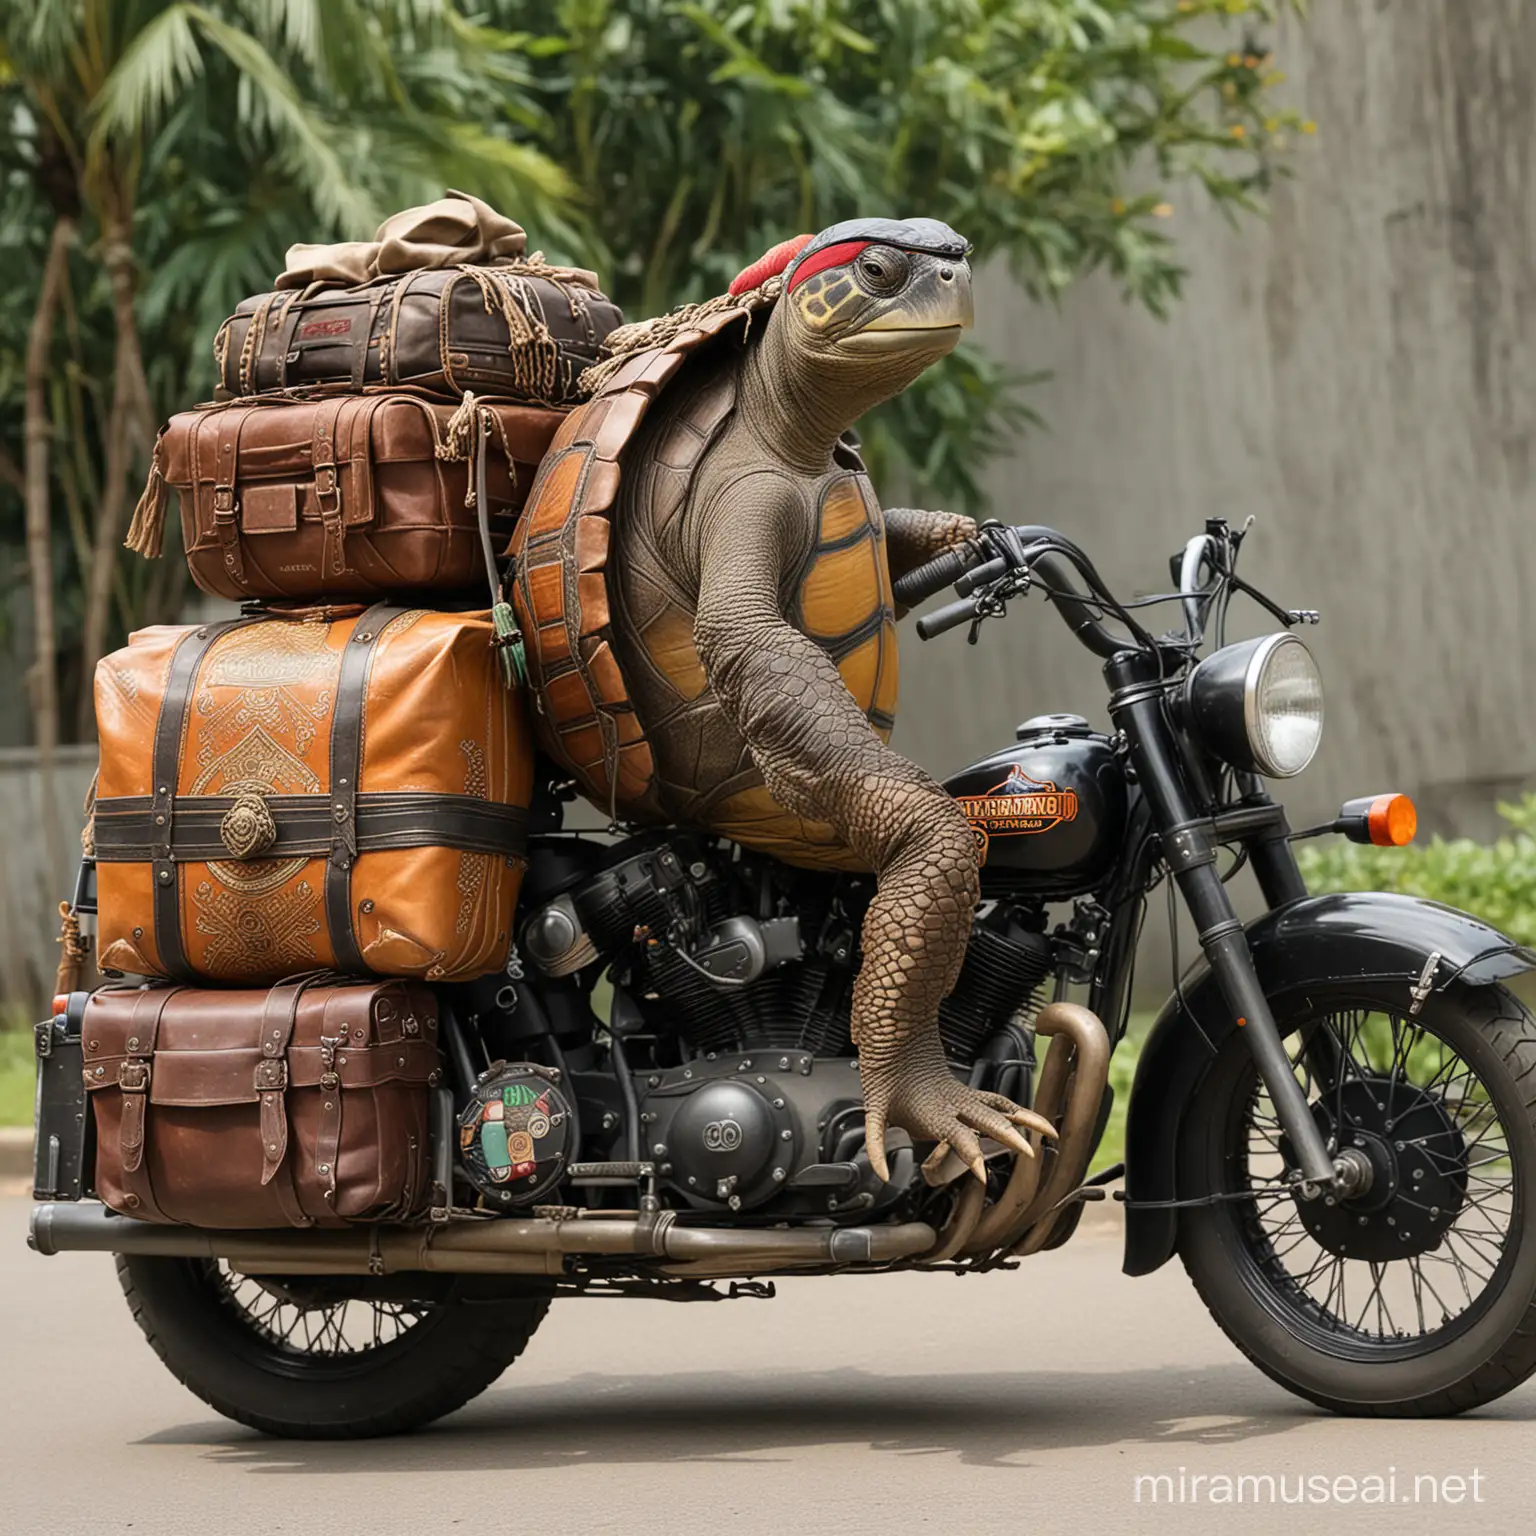 Malay Dressed Turtle Riding Harley Davidson with Luggage